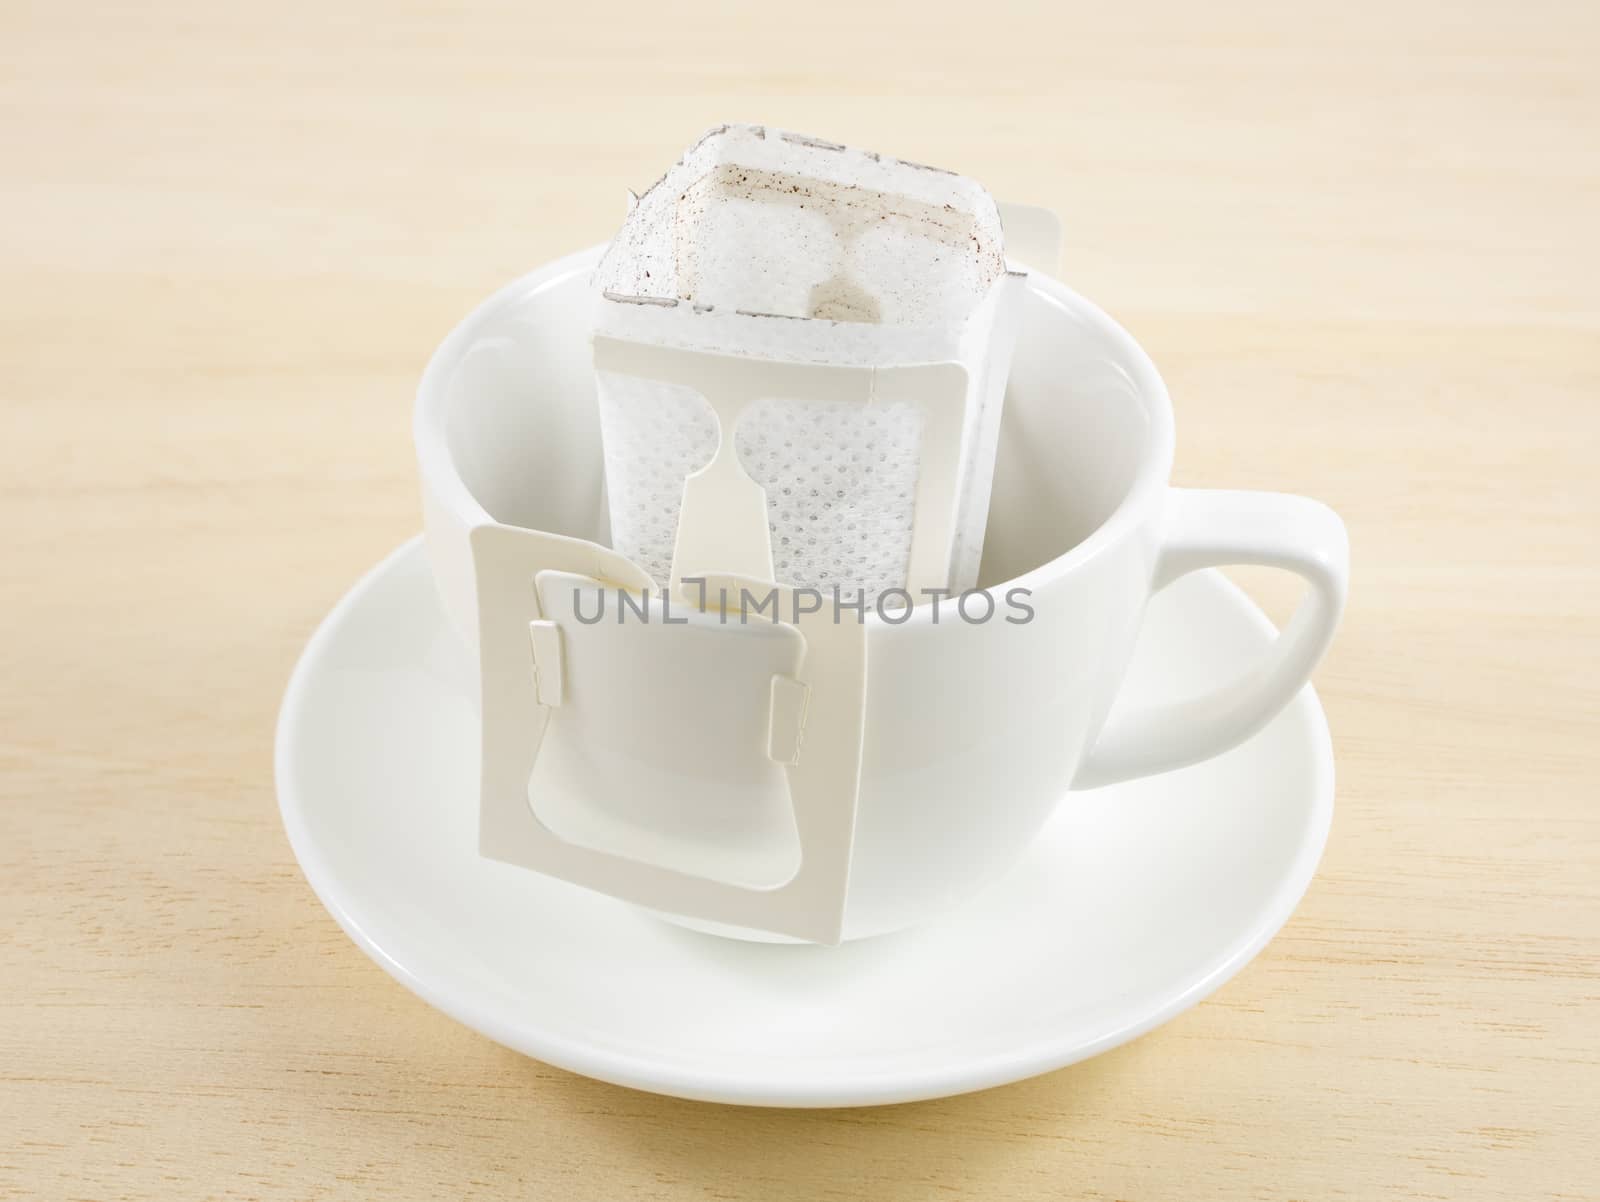 The instant freshly brewed coffee drip bag on white coffee cup.